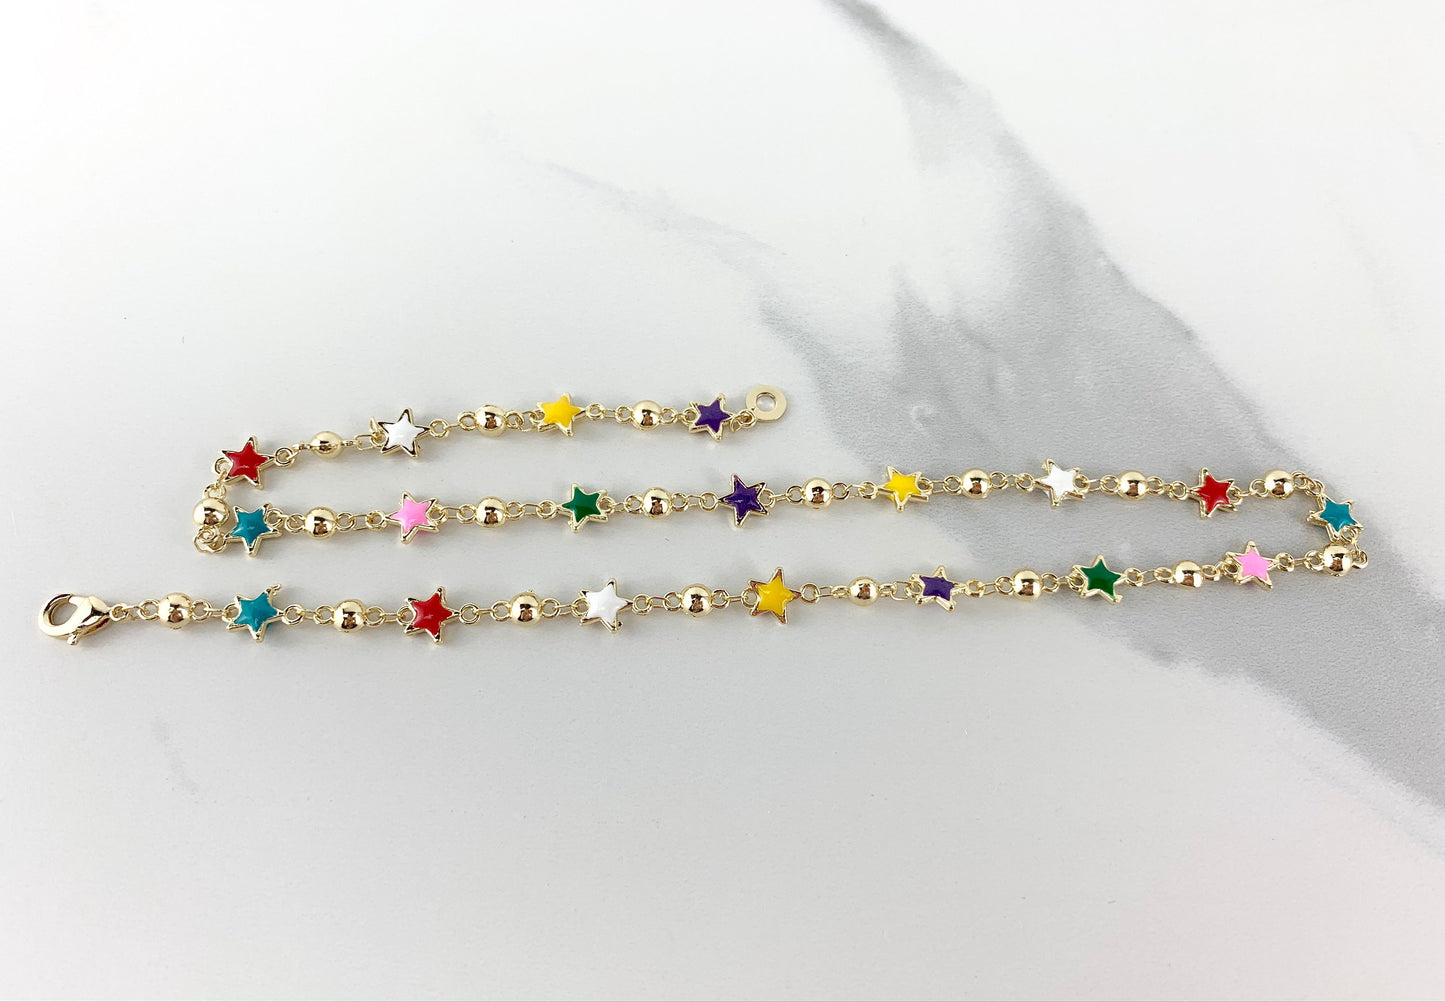 18k Gold Filled Bead Link Chain Featuring Colorful Enamel Stars Necklace Wholesale Jewelry Supplies